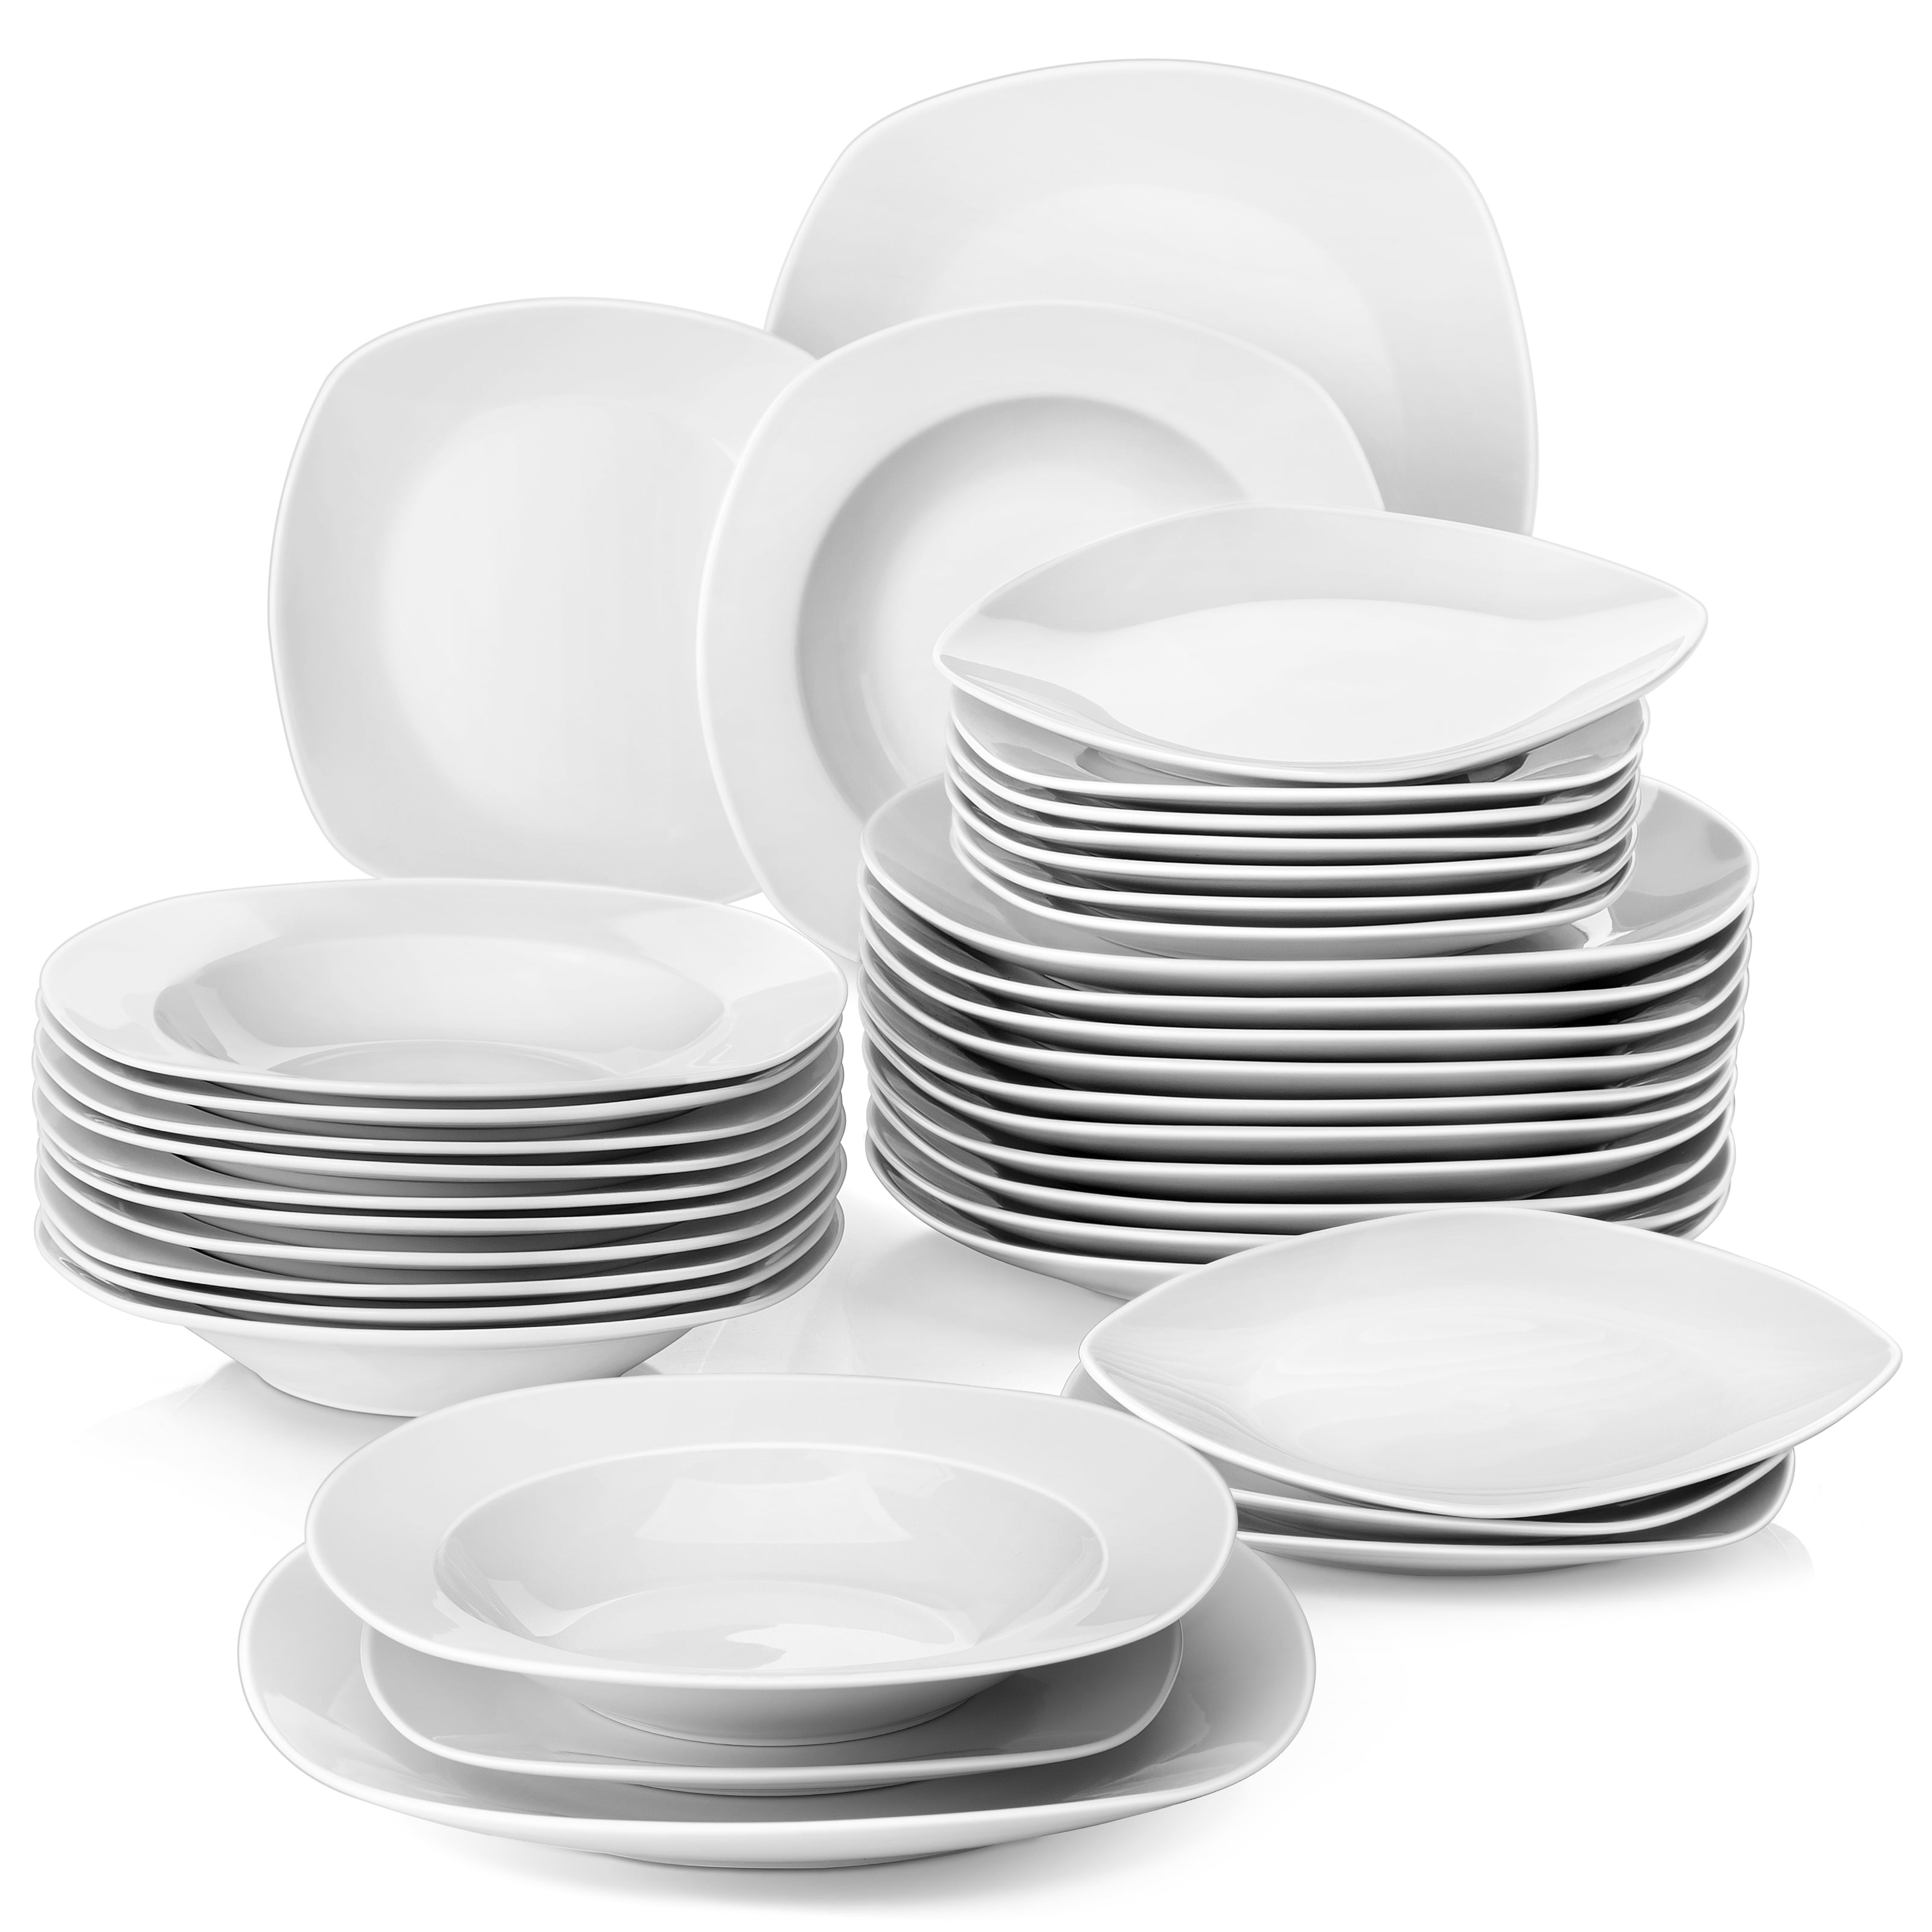 Dinner Plates and Cereal Bowls for 6 Person Series Elvira Saucers MALACASA Soup Plates 36 Pieces Cream White Porcelain Dinner Service Combi-Set of 6 x Coffee Cups Dessert Plates 